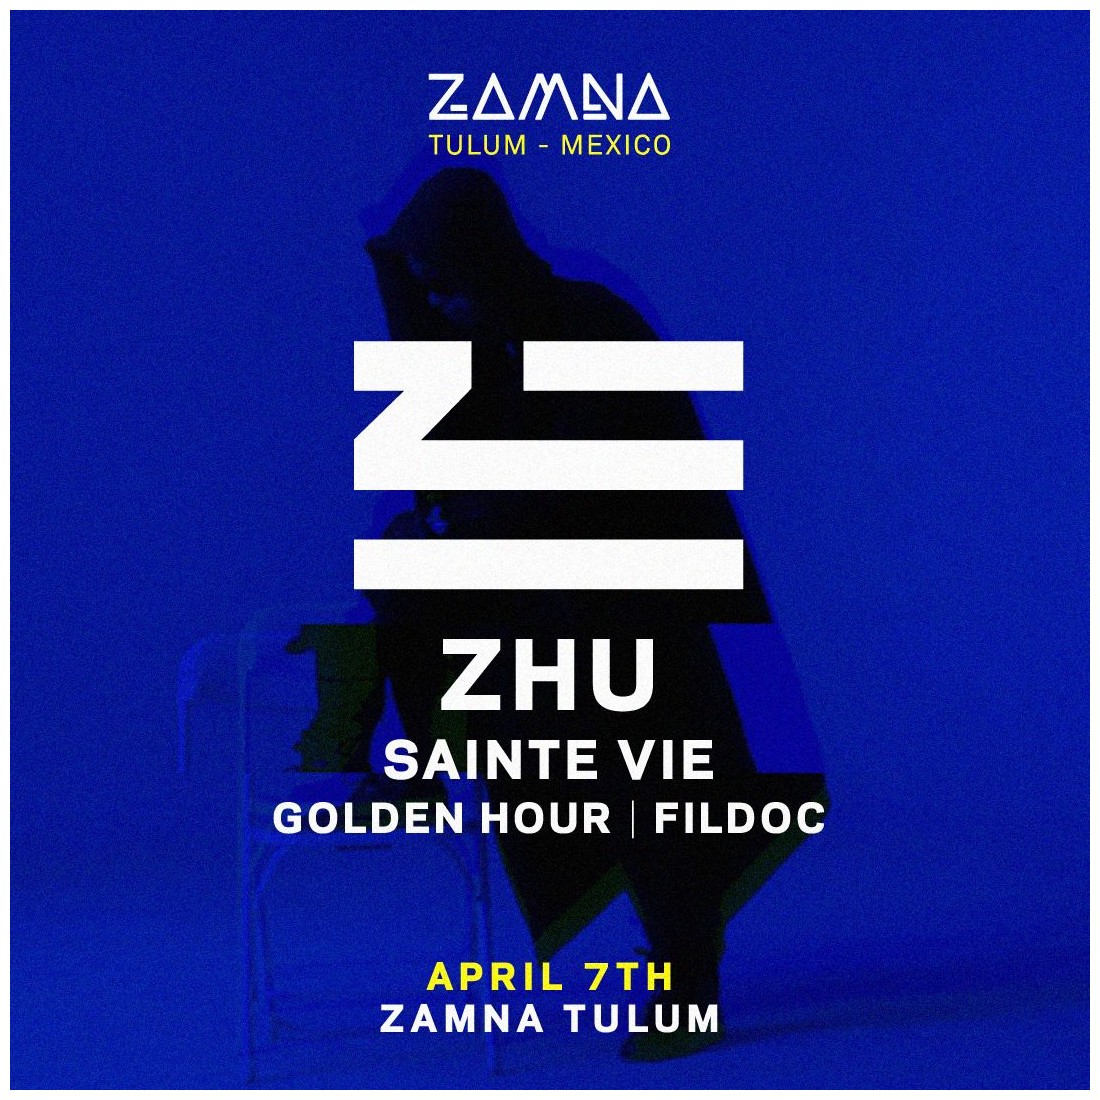 A night with ZHU - Exchange Multi-pass GENERAL